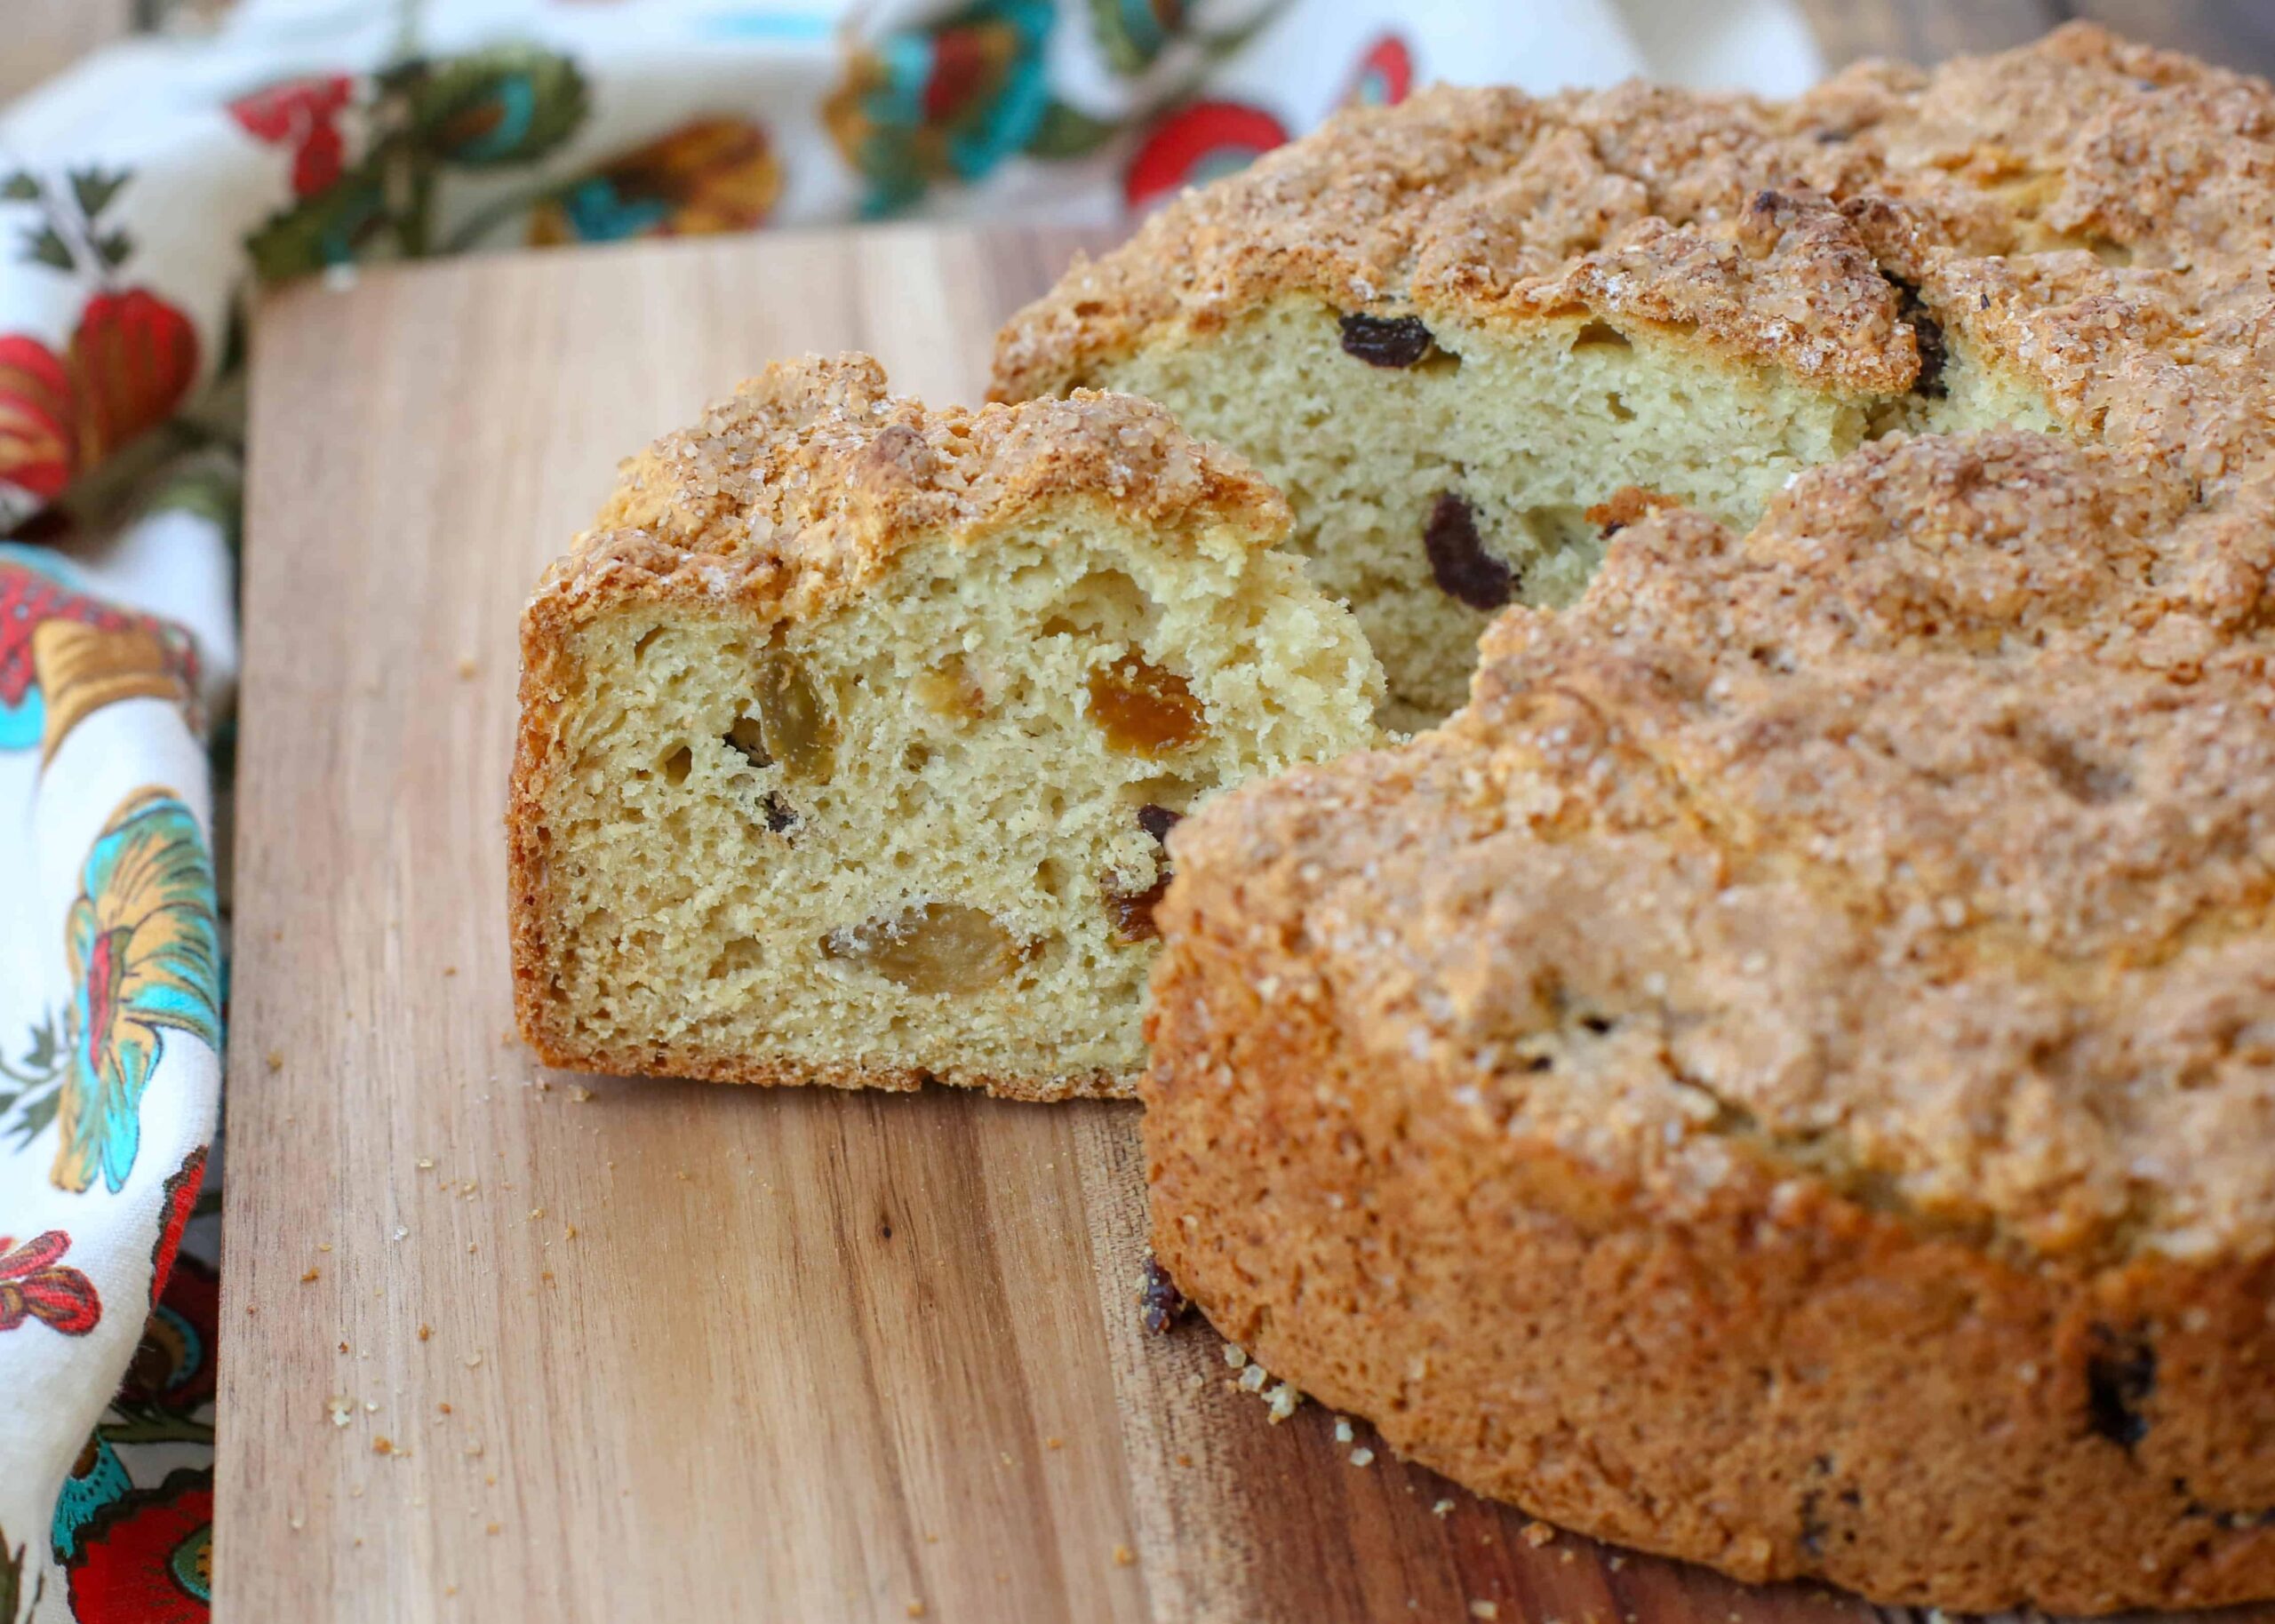  The perfect combination of texture and flavors in this Irish soda bread with Raisinets